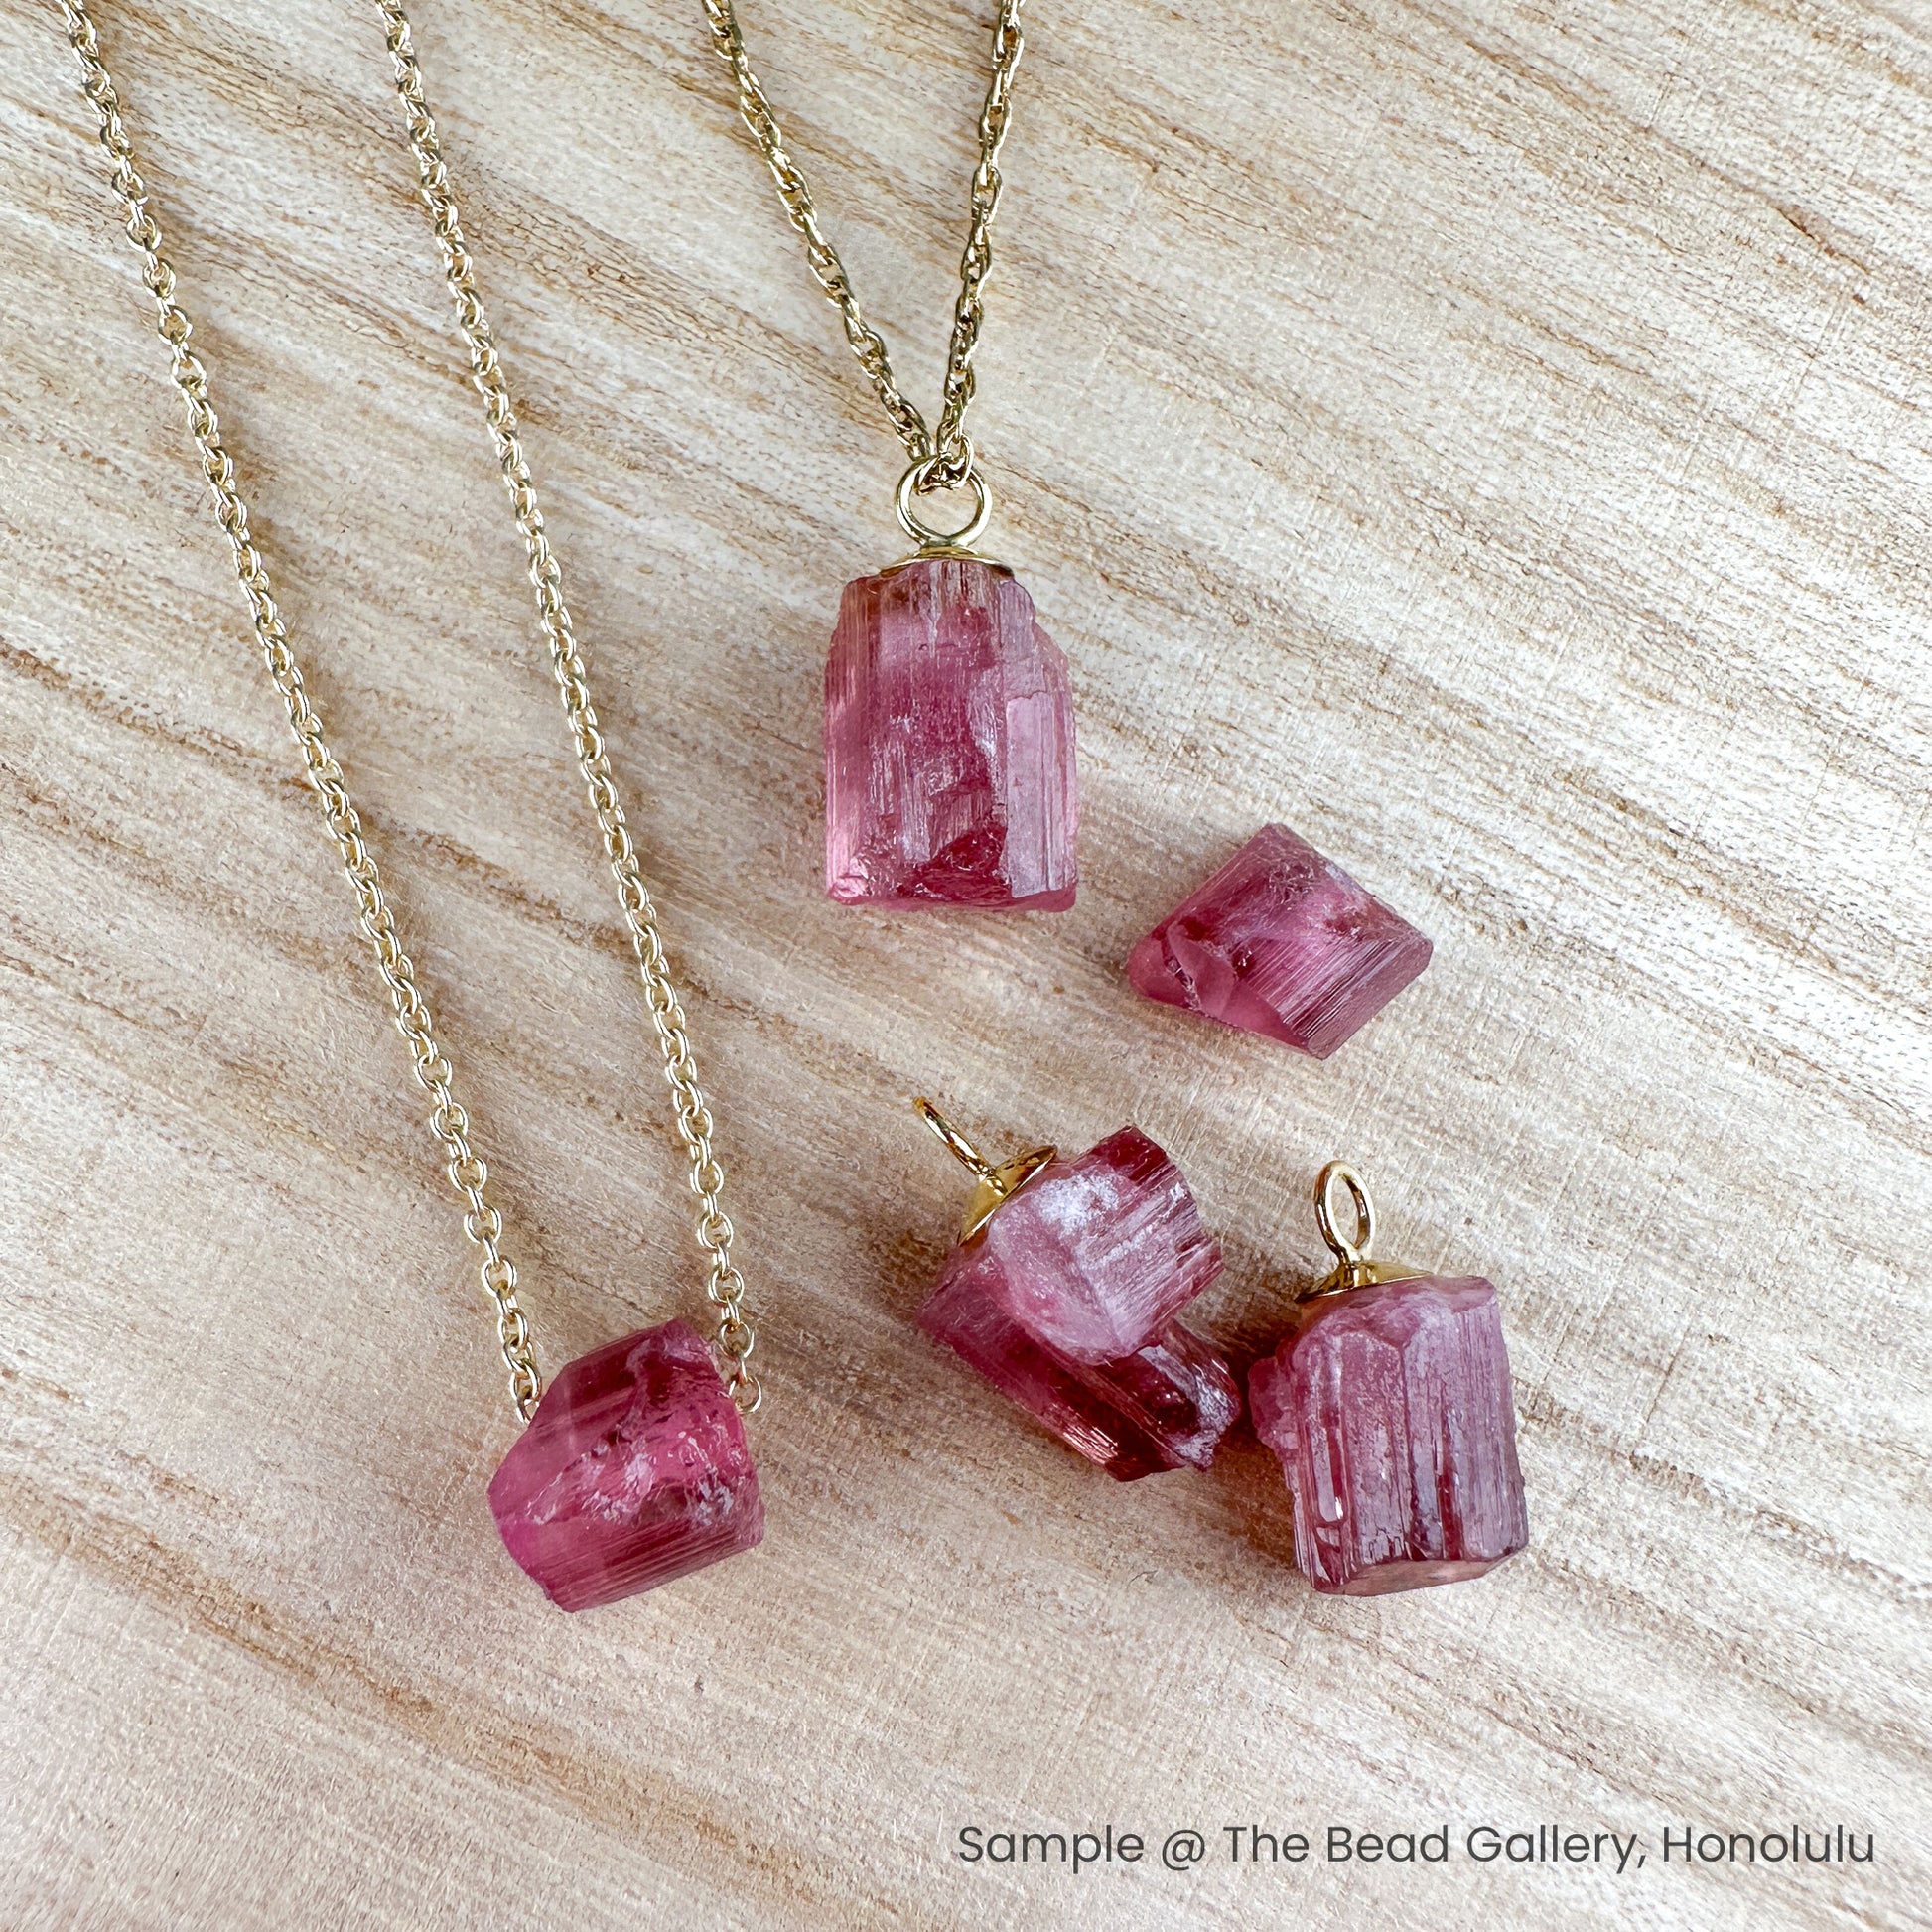 Natural Pink Rubellite Tourmaline Raw Crystal Specimen (2 Options) - 1 pc.-The Bead Gallery Honolulu